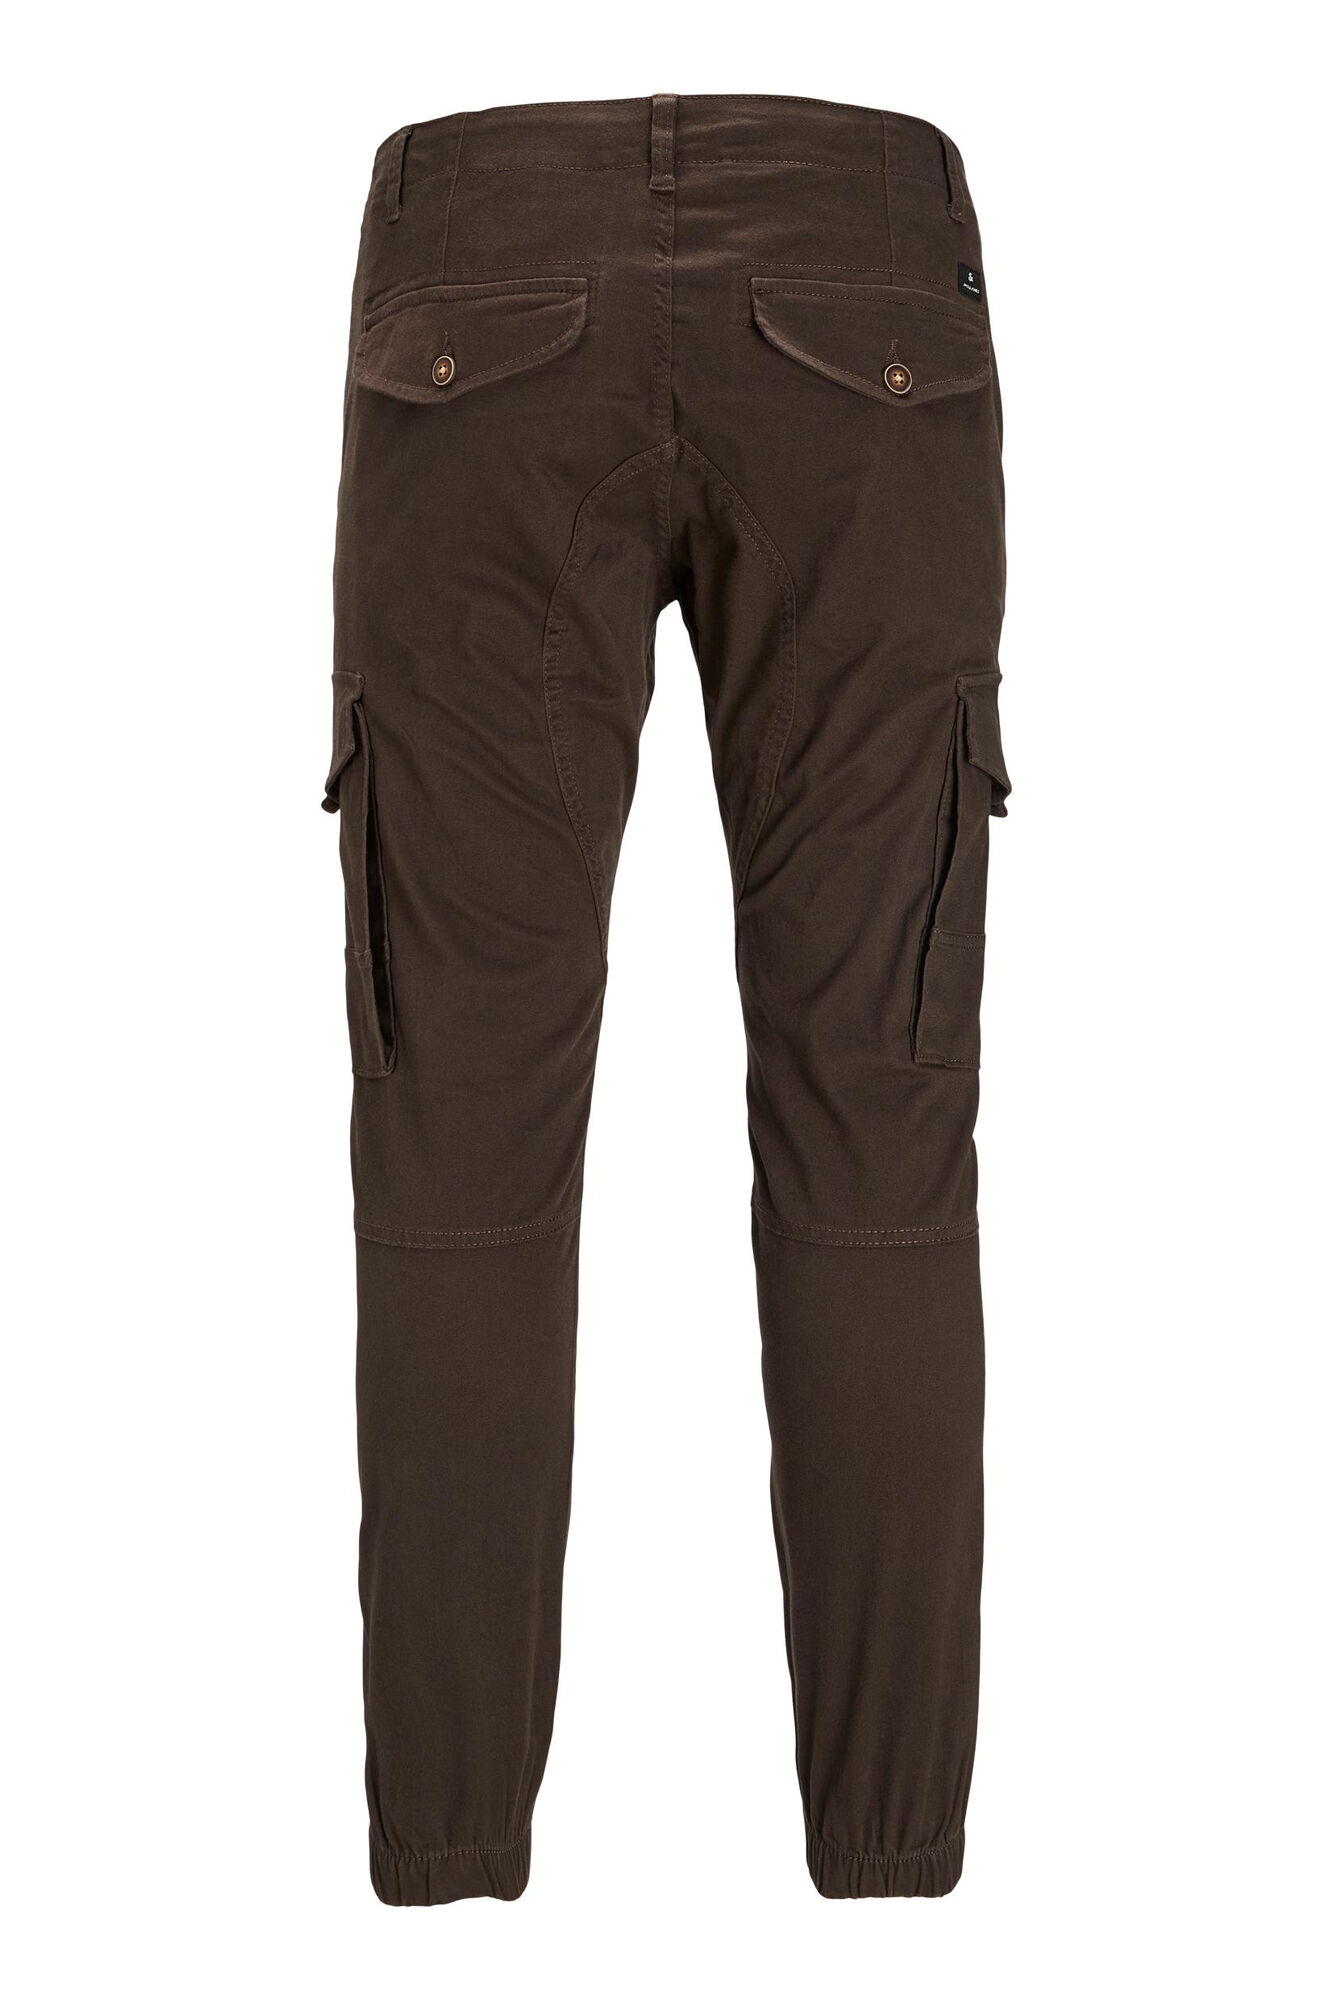 Cargo trousers - Light brown - Kids | H&M IN